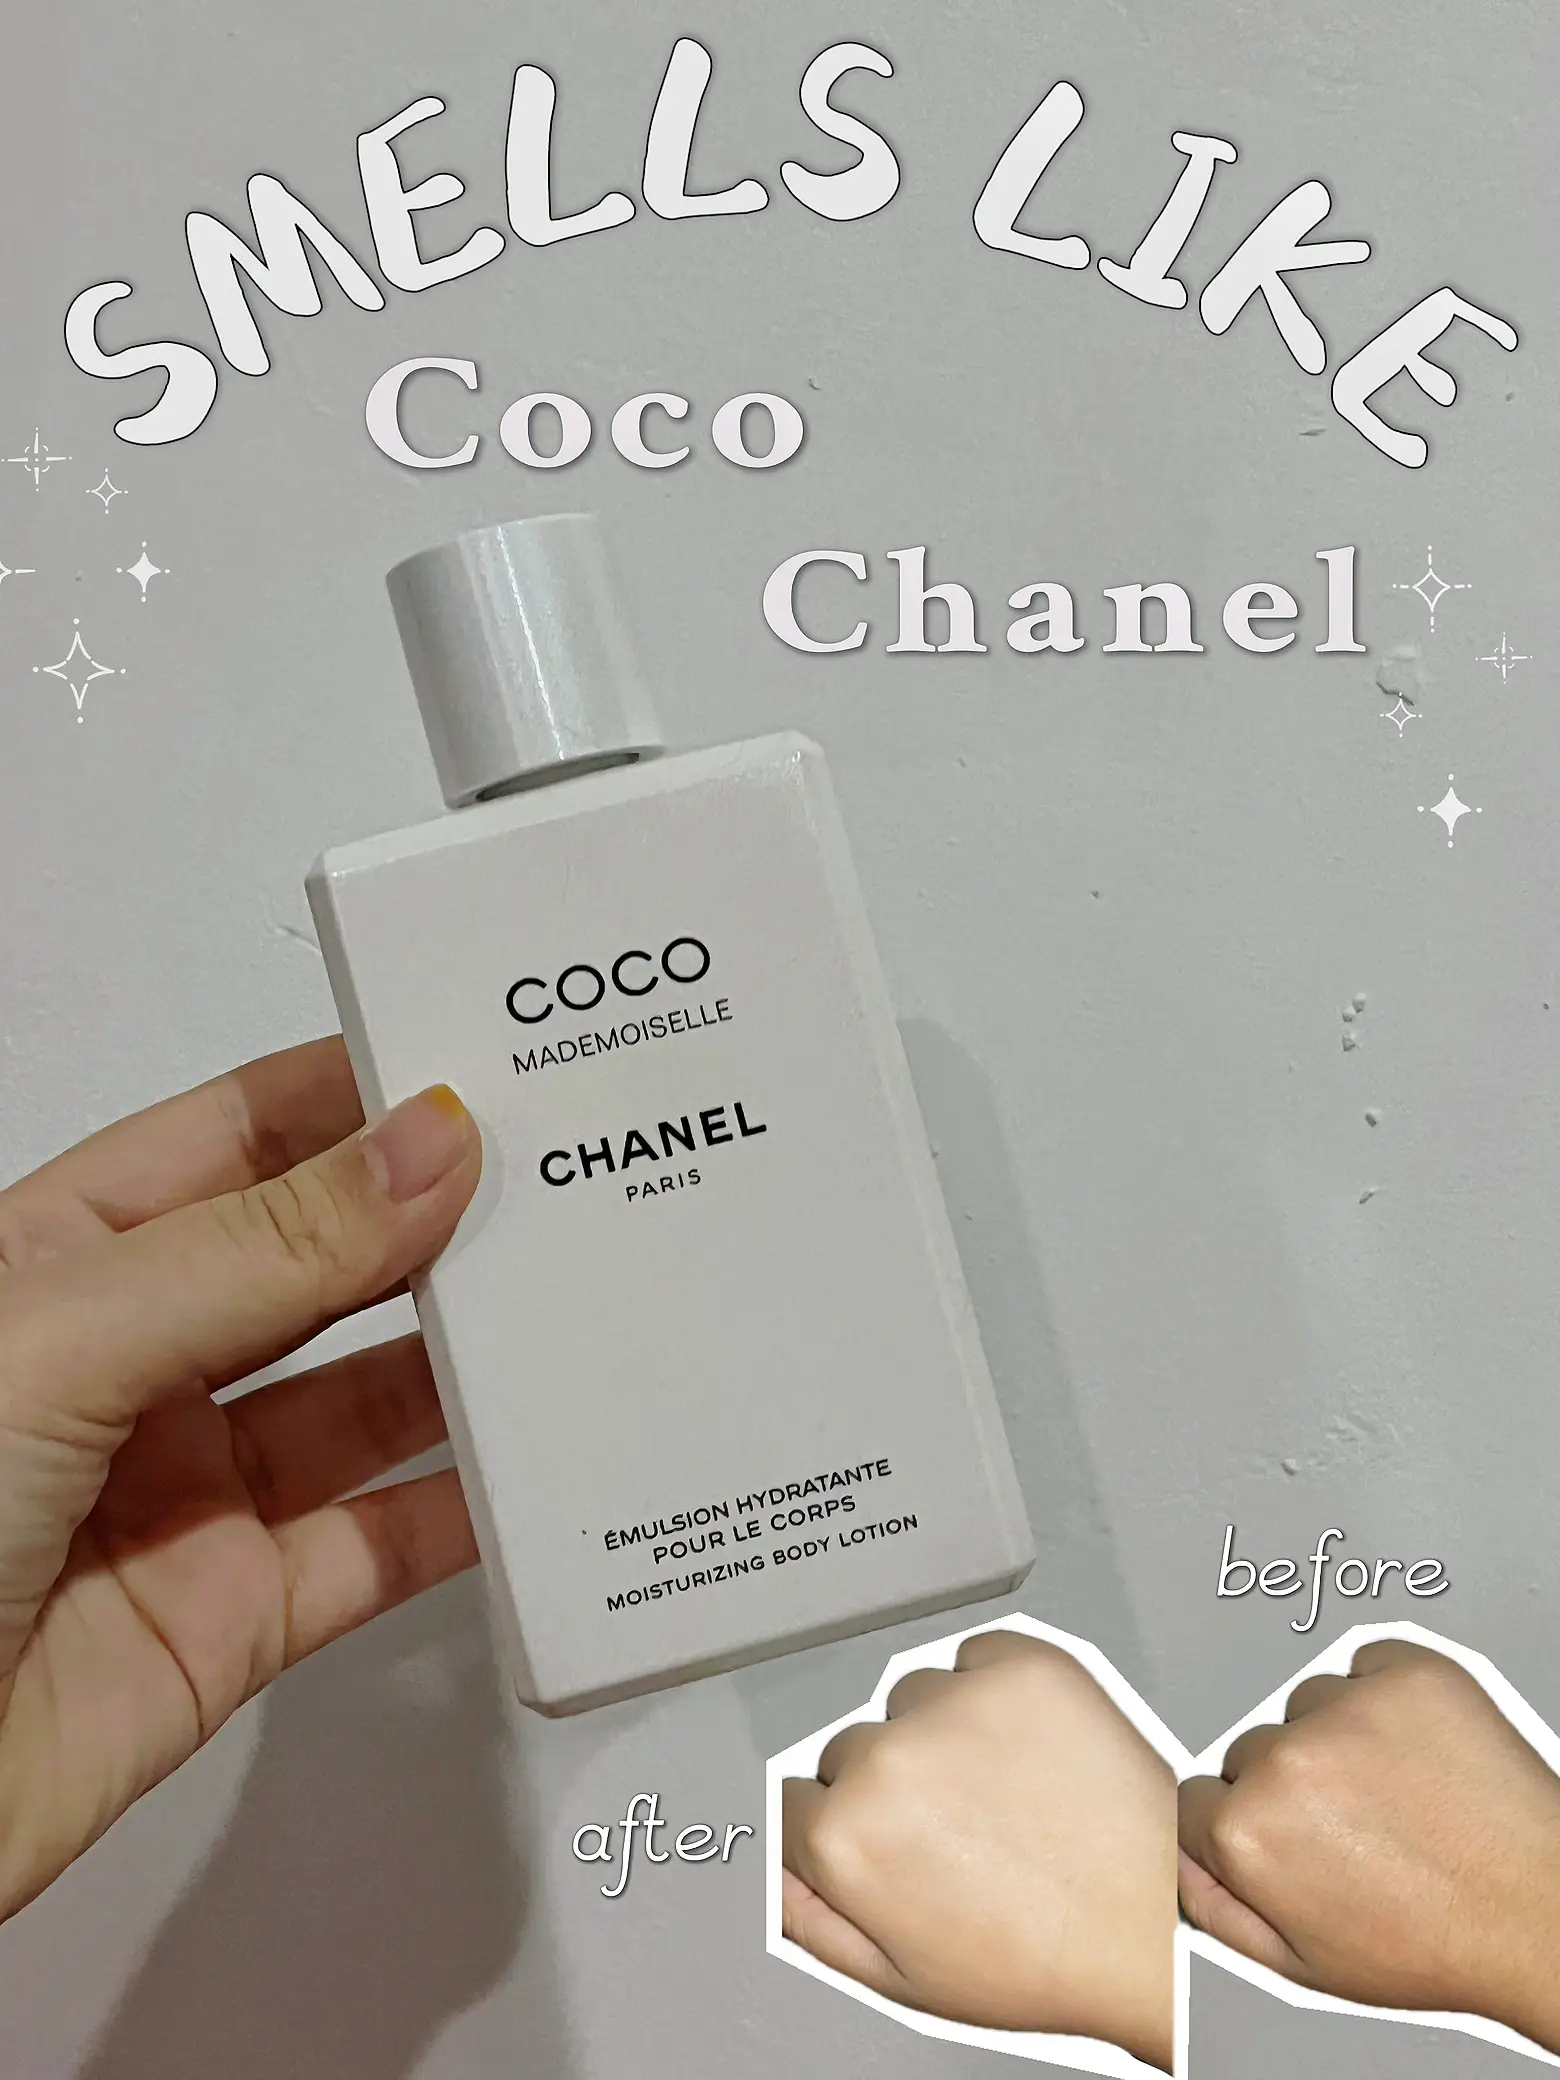 Smells Like Coco Chanel, Body Lotion, Gallery posted by Dina ⁺˳✧༚ ⁺˳✧༚